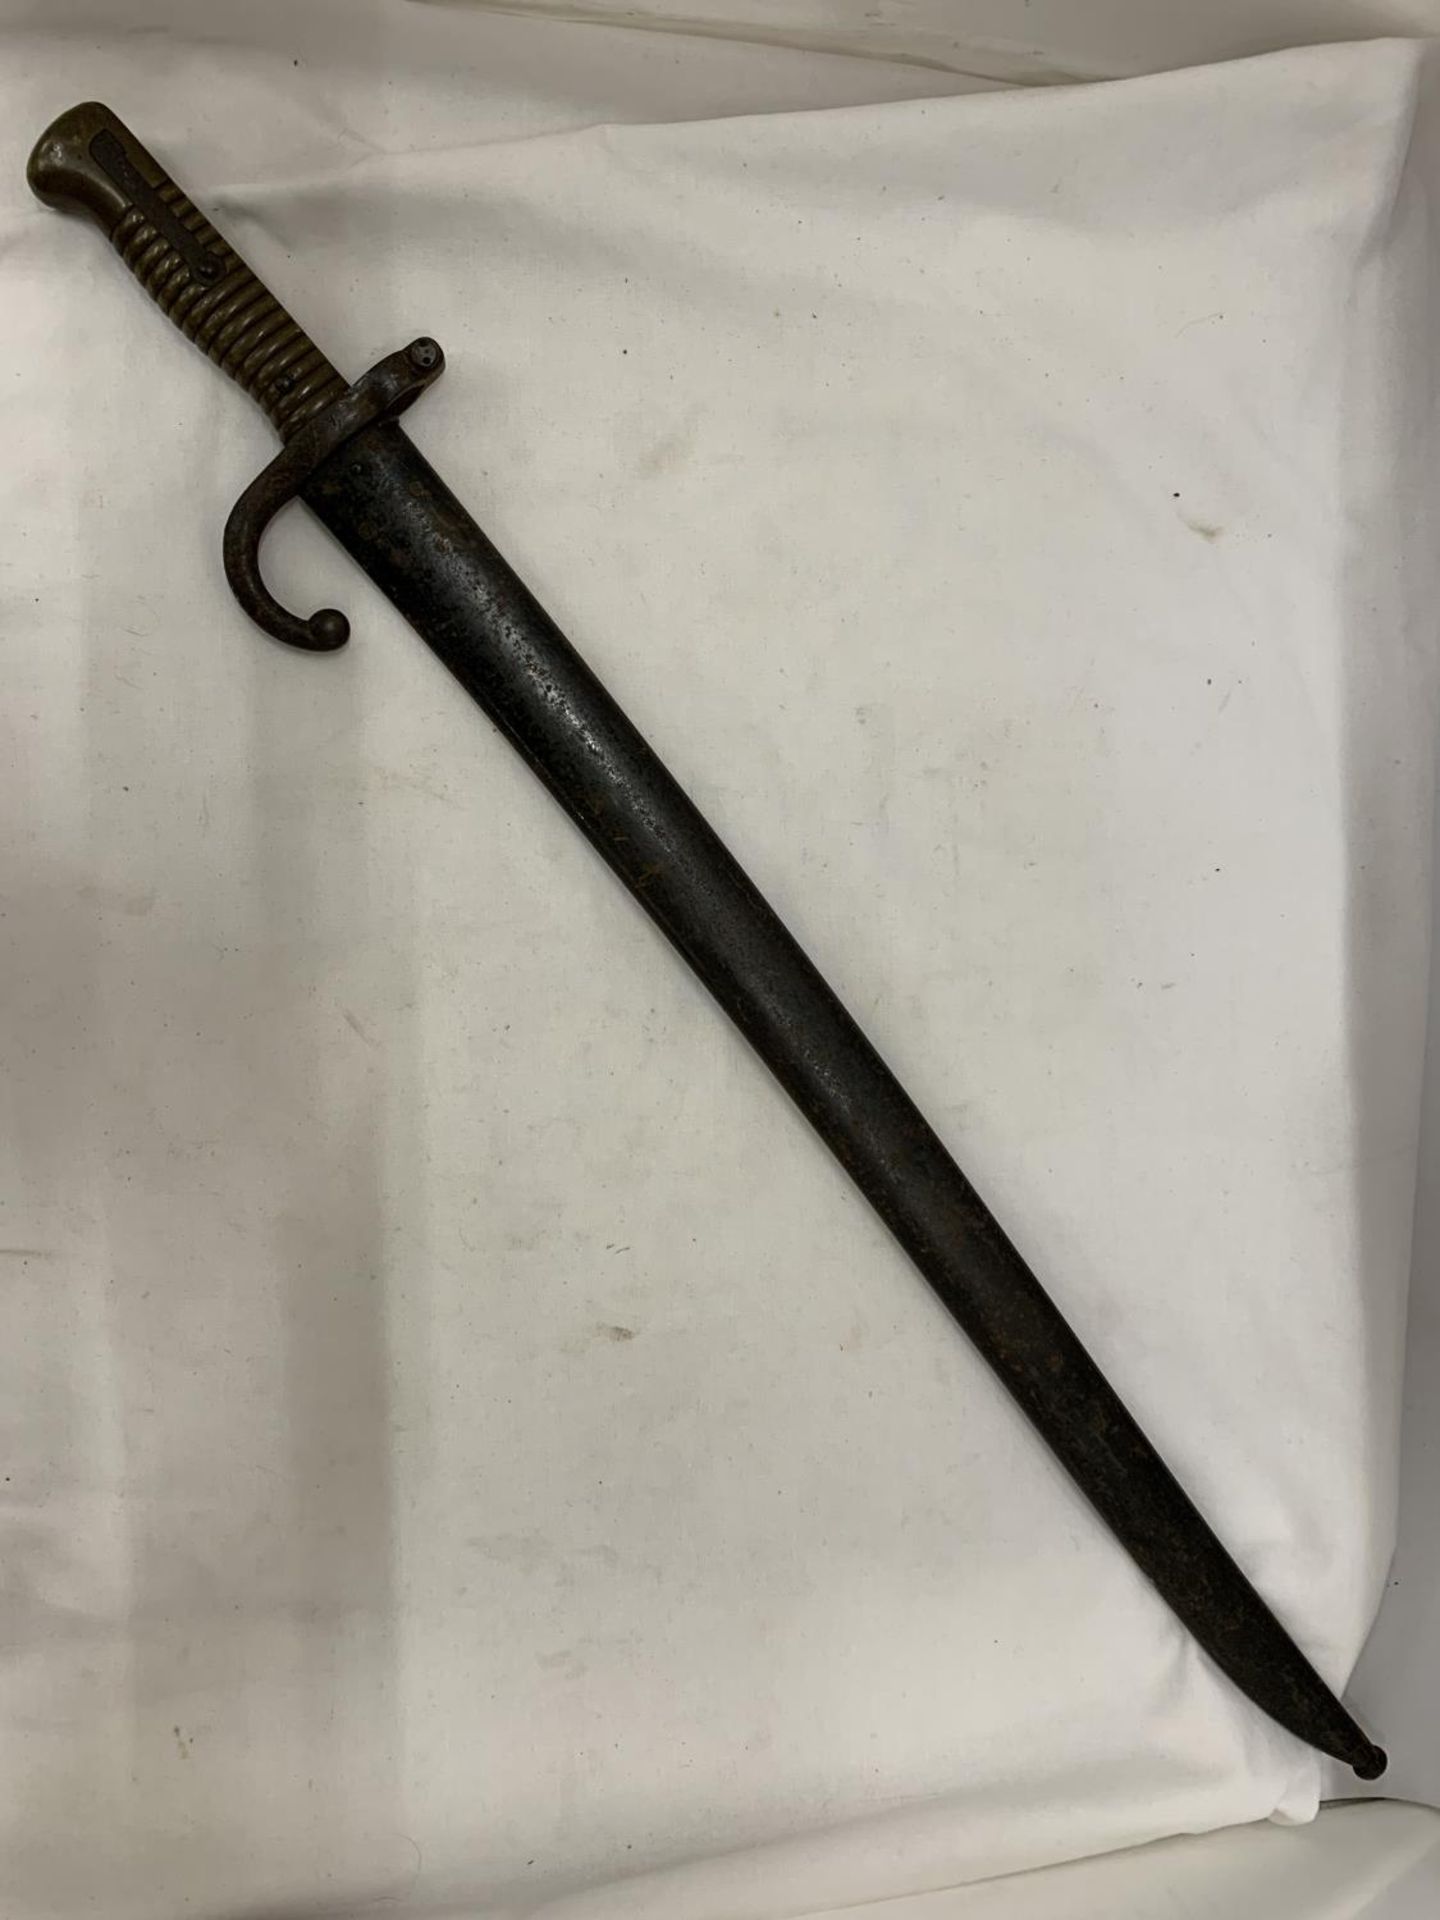 A FRENCH, 1866, CHASSEPOT SWORD/BAYONET - Image 2 of 6